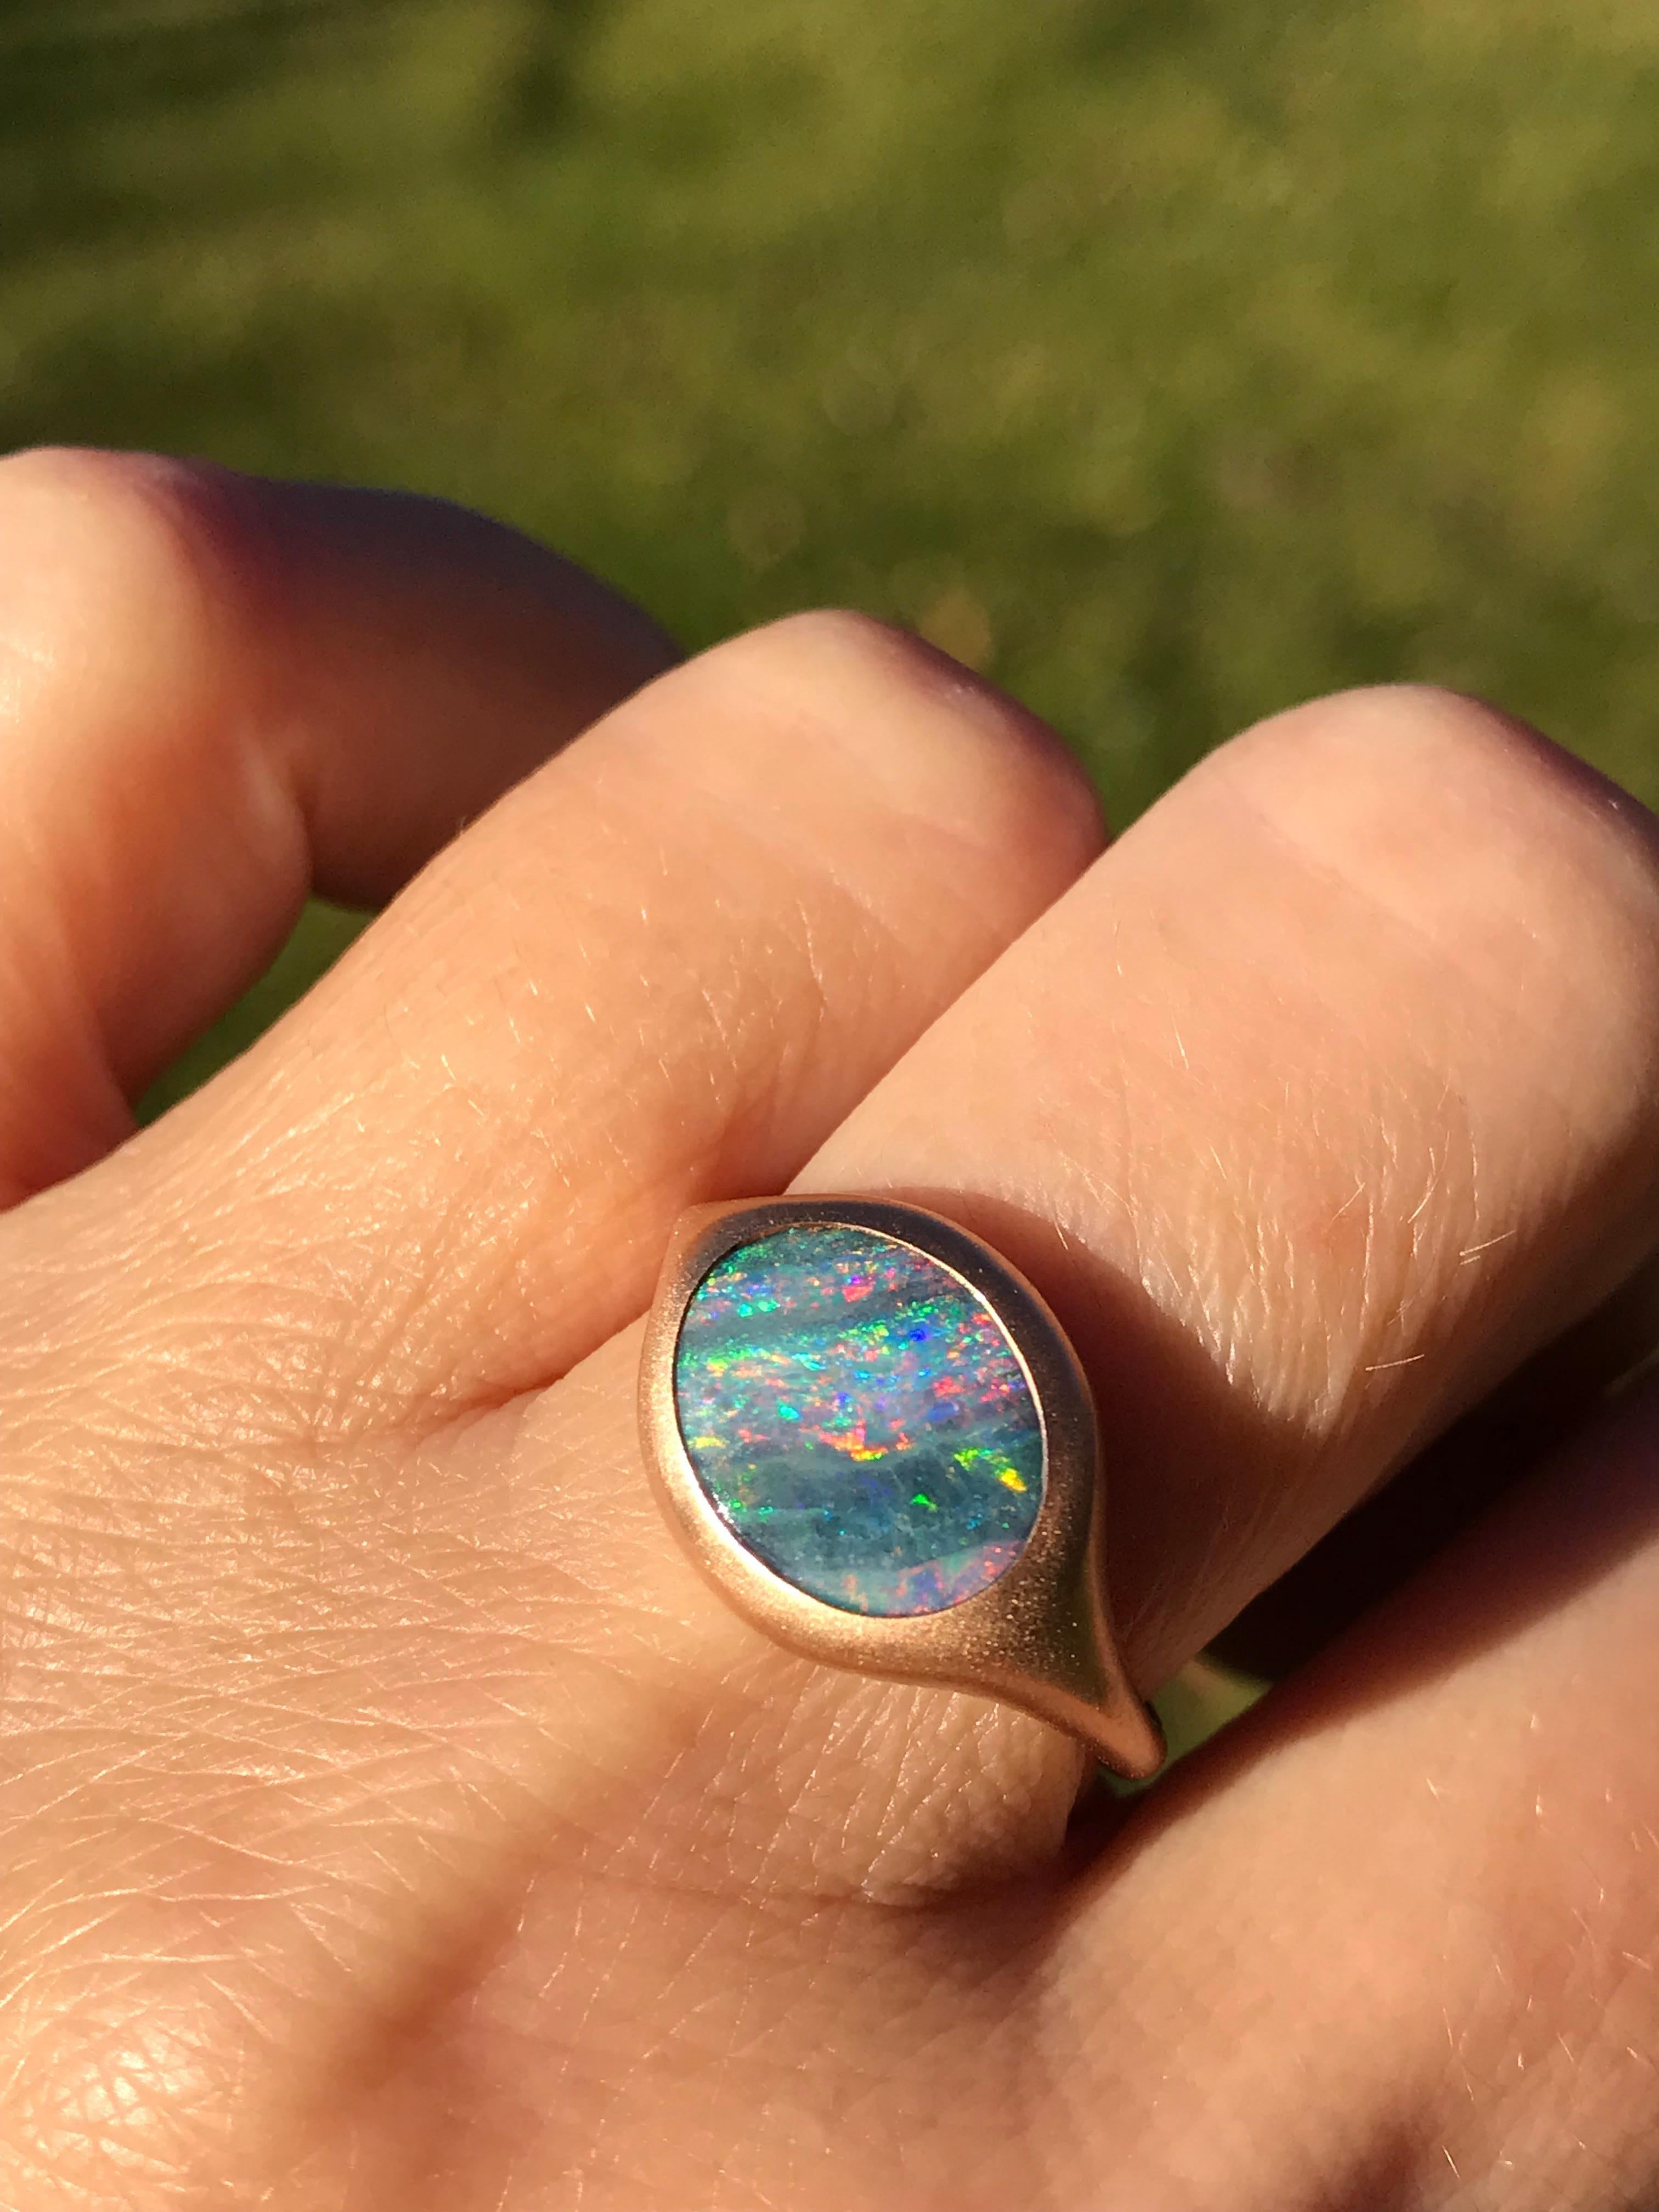 Dalben design 18k rose gold satin finishing ring with a  2,77 carat bezel-set oval Australian boulder opal 
The Australian Opal have pink , blue and green spots.
Ring size US  6 3/4  - EU 54 re-sizable to most finger sizes. 
Bezel setting dimension: